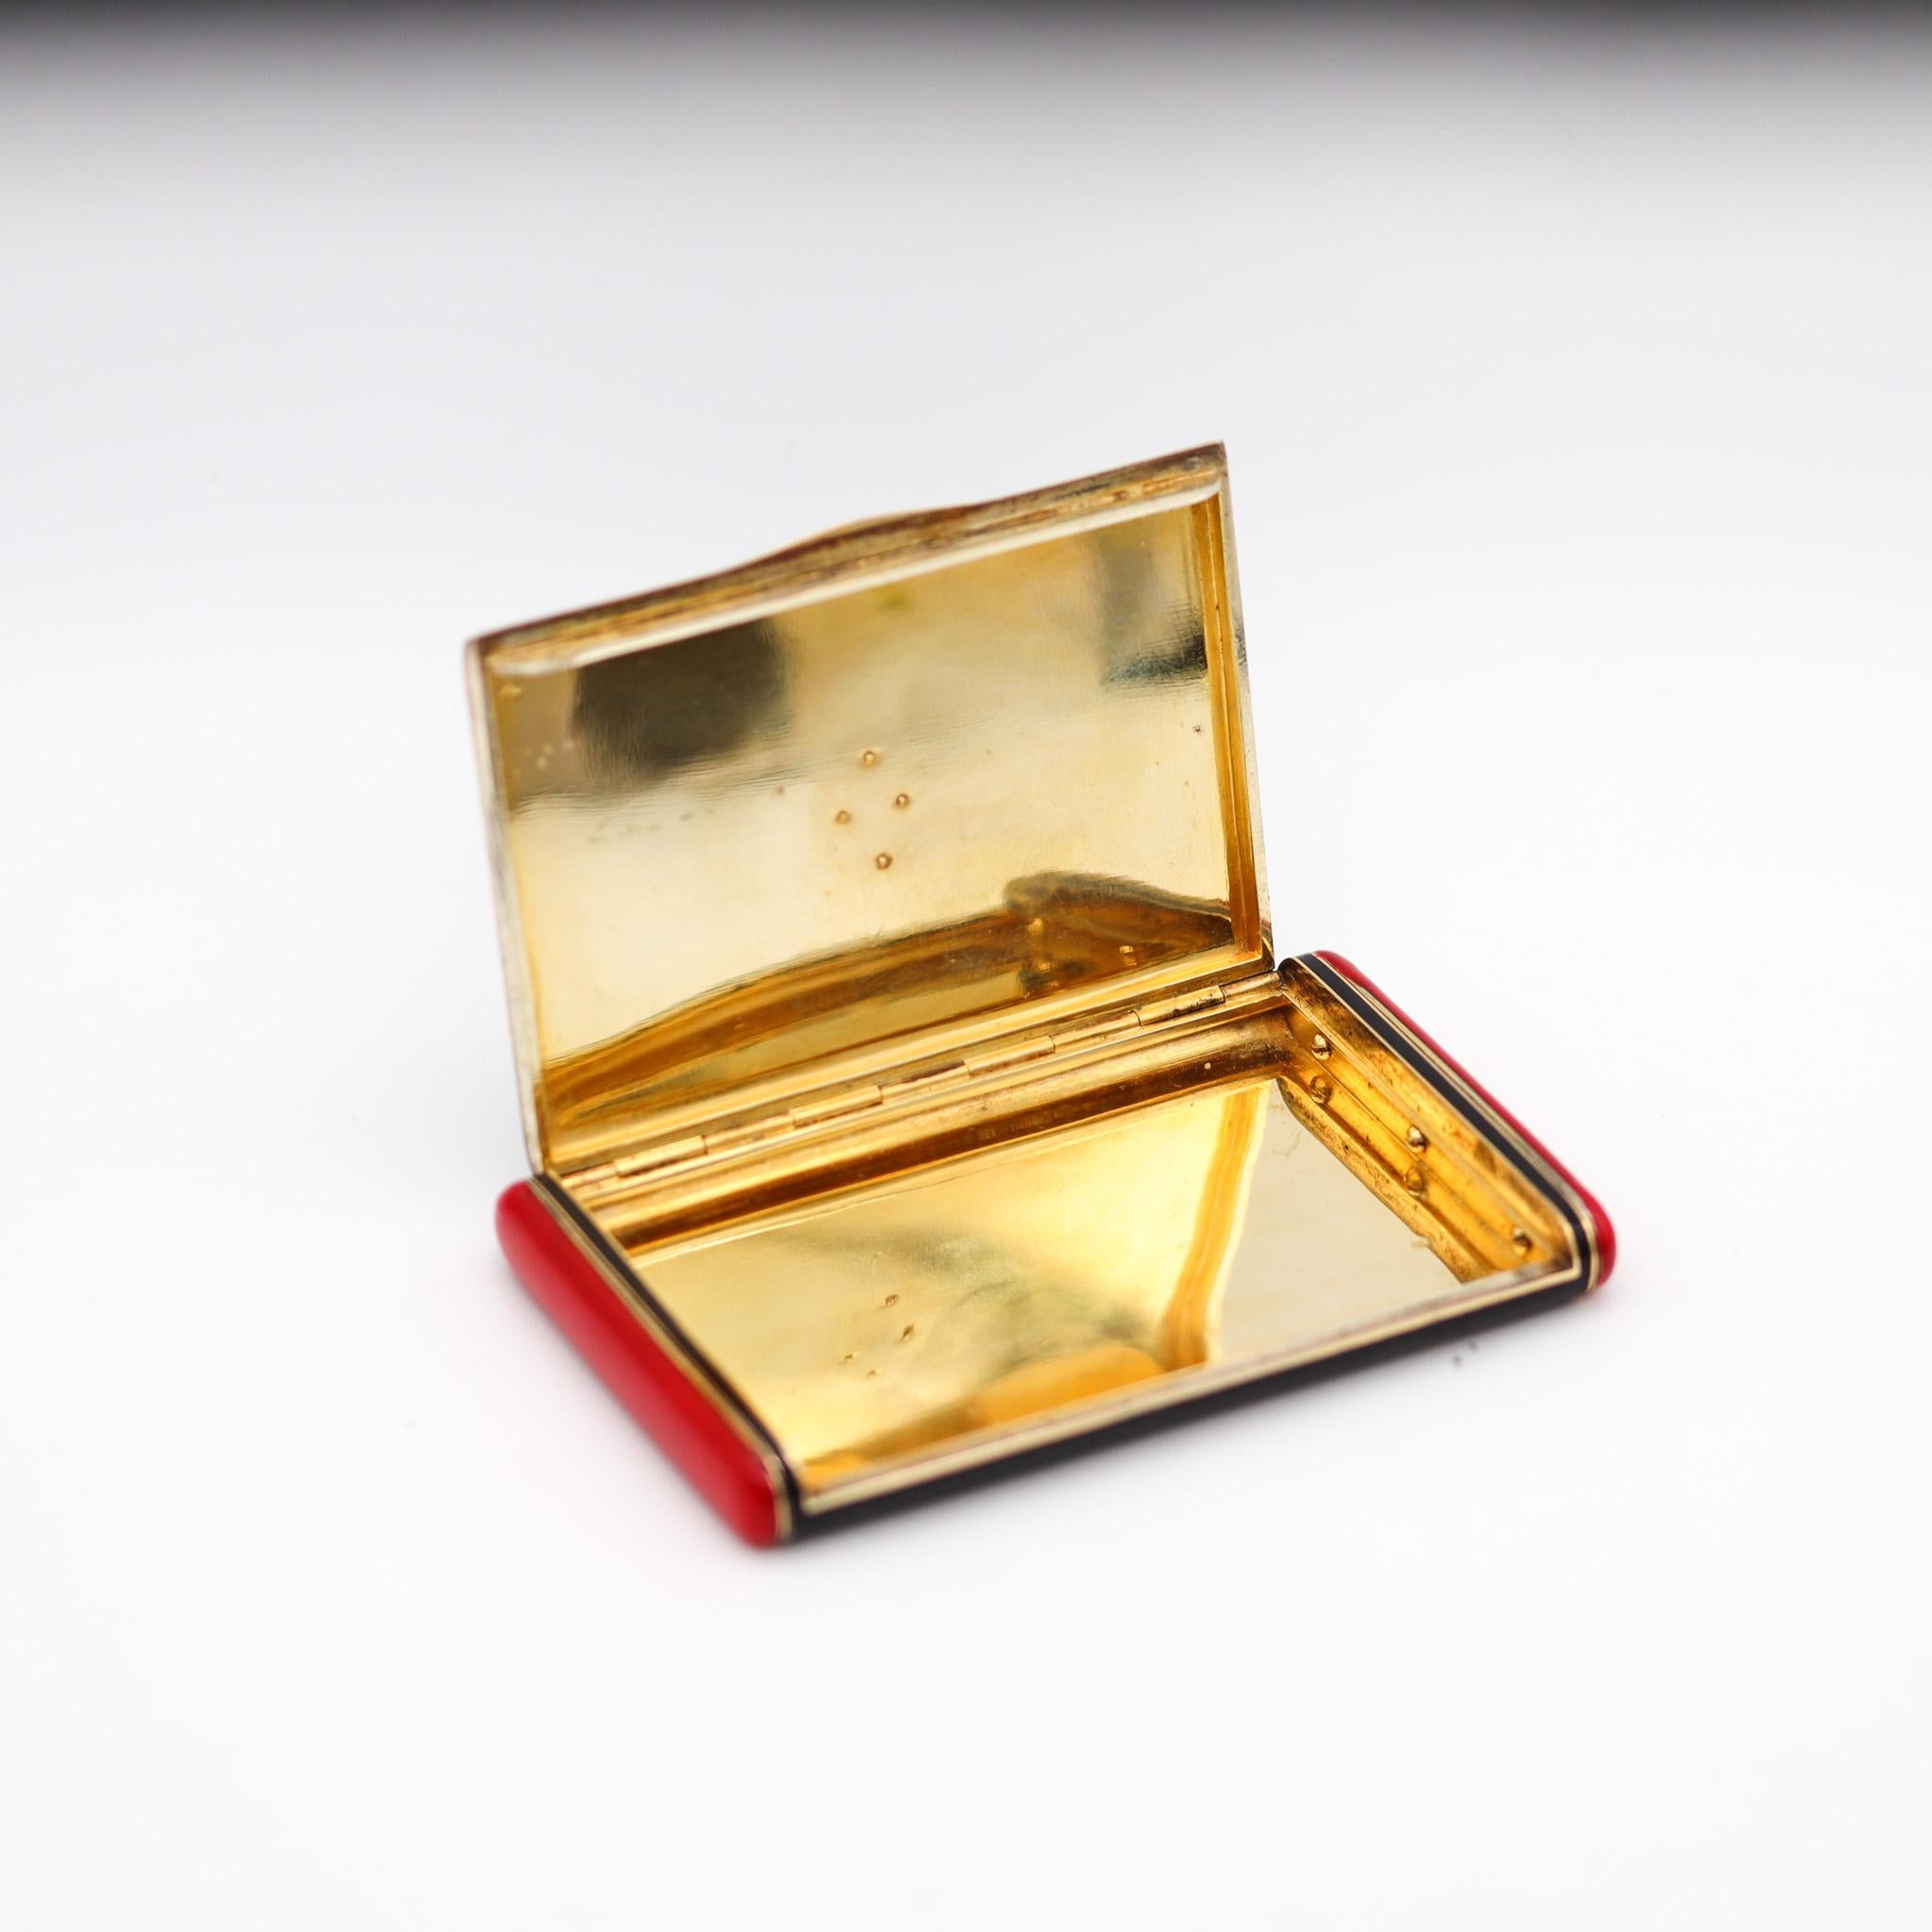 Tonnel Paris 1928 Art Deco Box In 14Kt Gold With Red & Black Lacquer And Diamond In Good Condition For Sale In Miami, FL